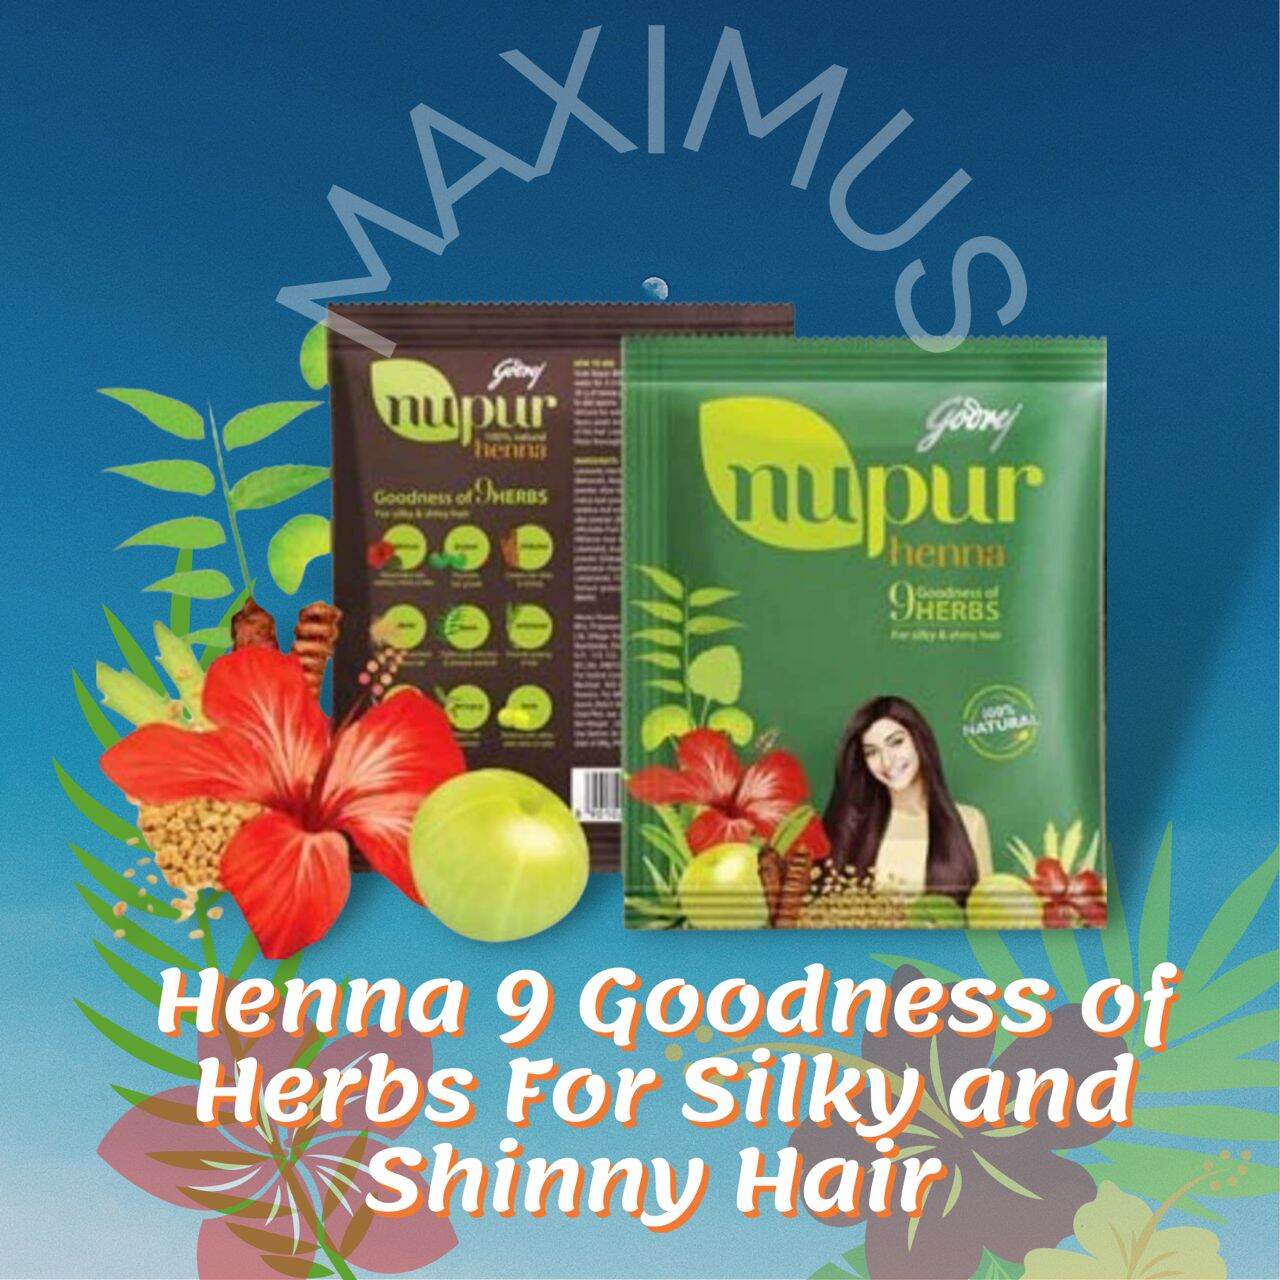 Nupur henna 9 Goodness OF Herbs (1KG) For silky&shiny hair 100% natural |  Lazada